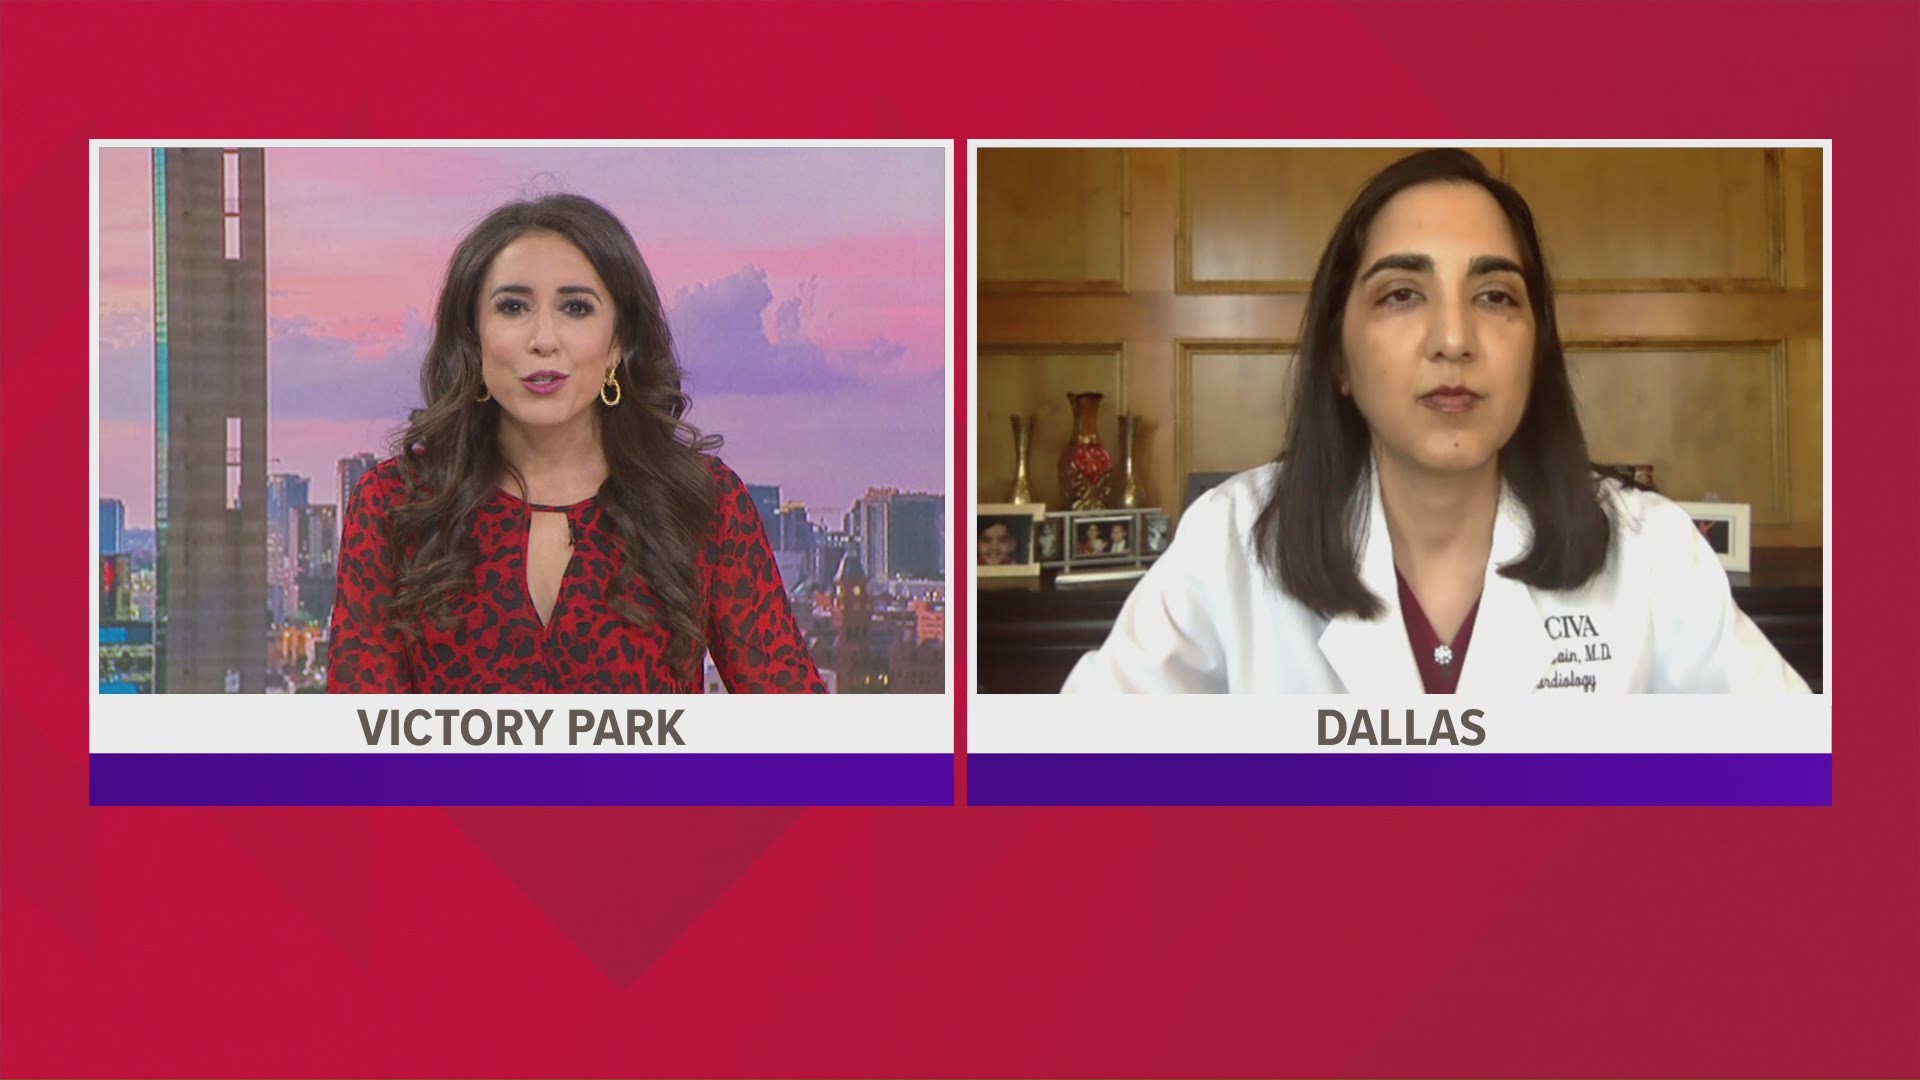 Dr. Tulika Jain, a cardiologist at Texas Health Dallas explains what heart disease is and health precautions people can take to avoid it.